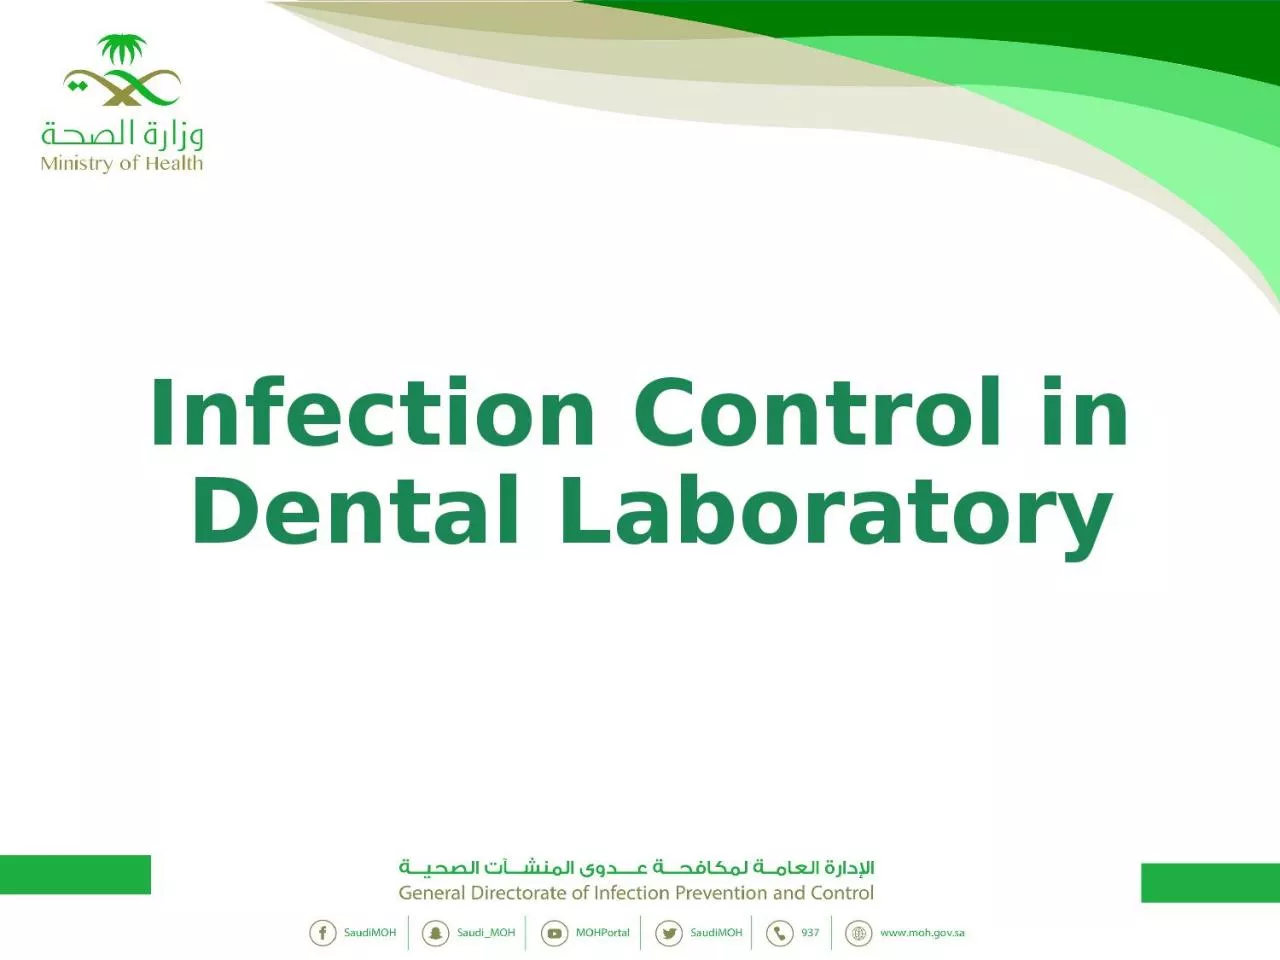 Infection Control in Dental Laboratory